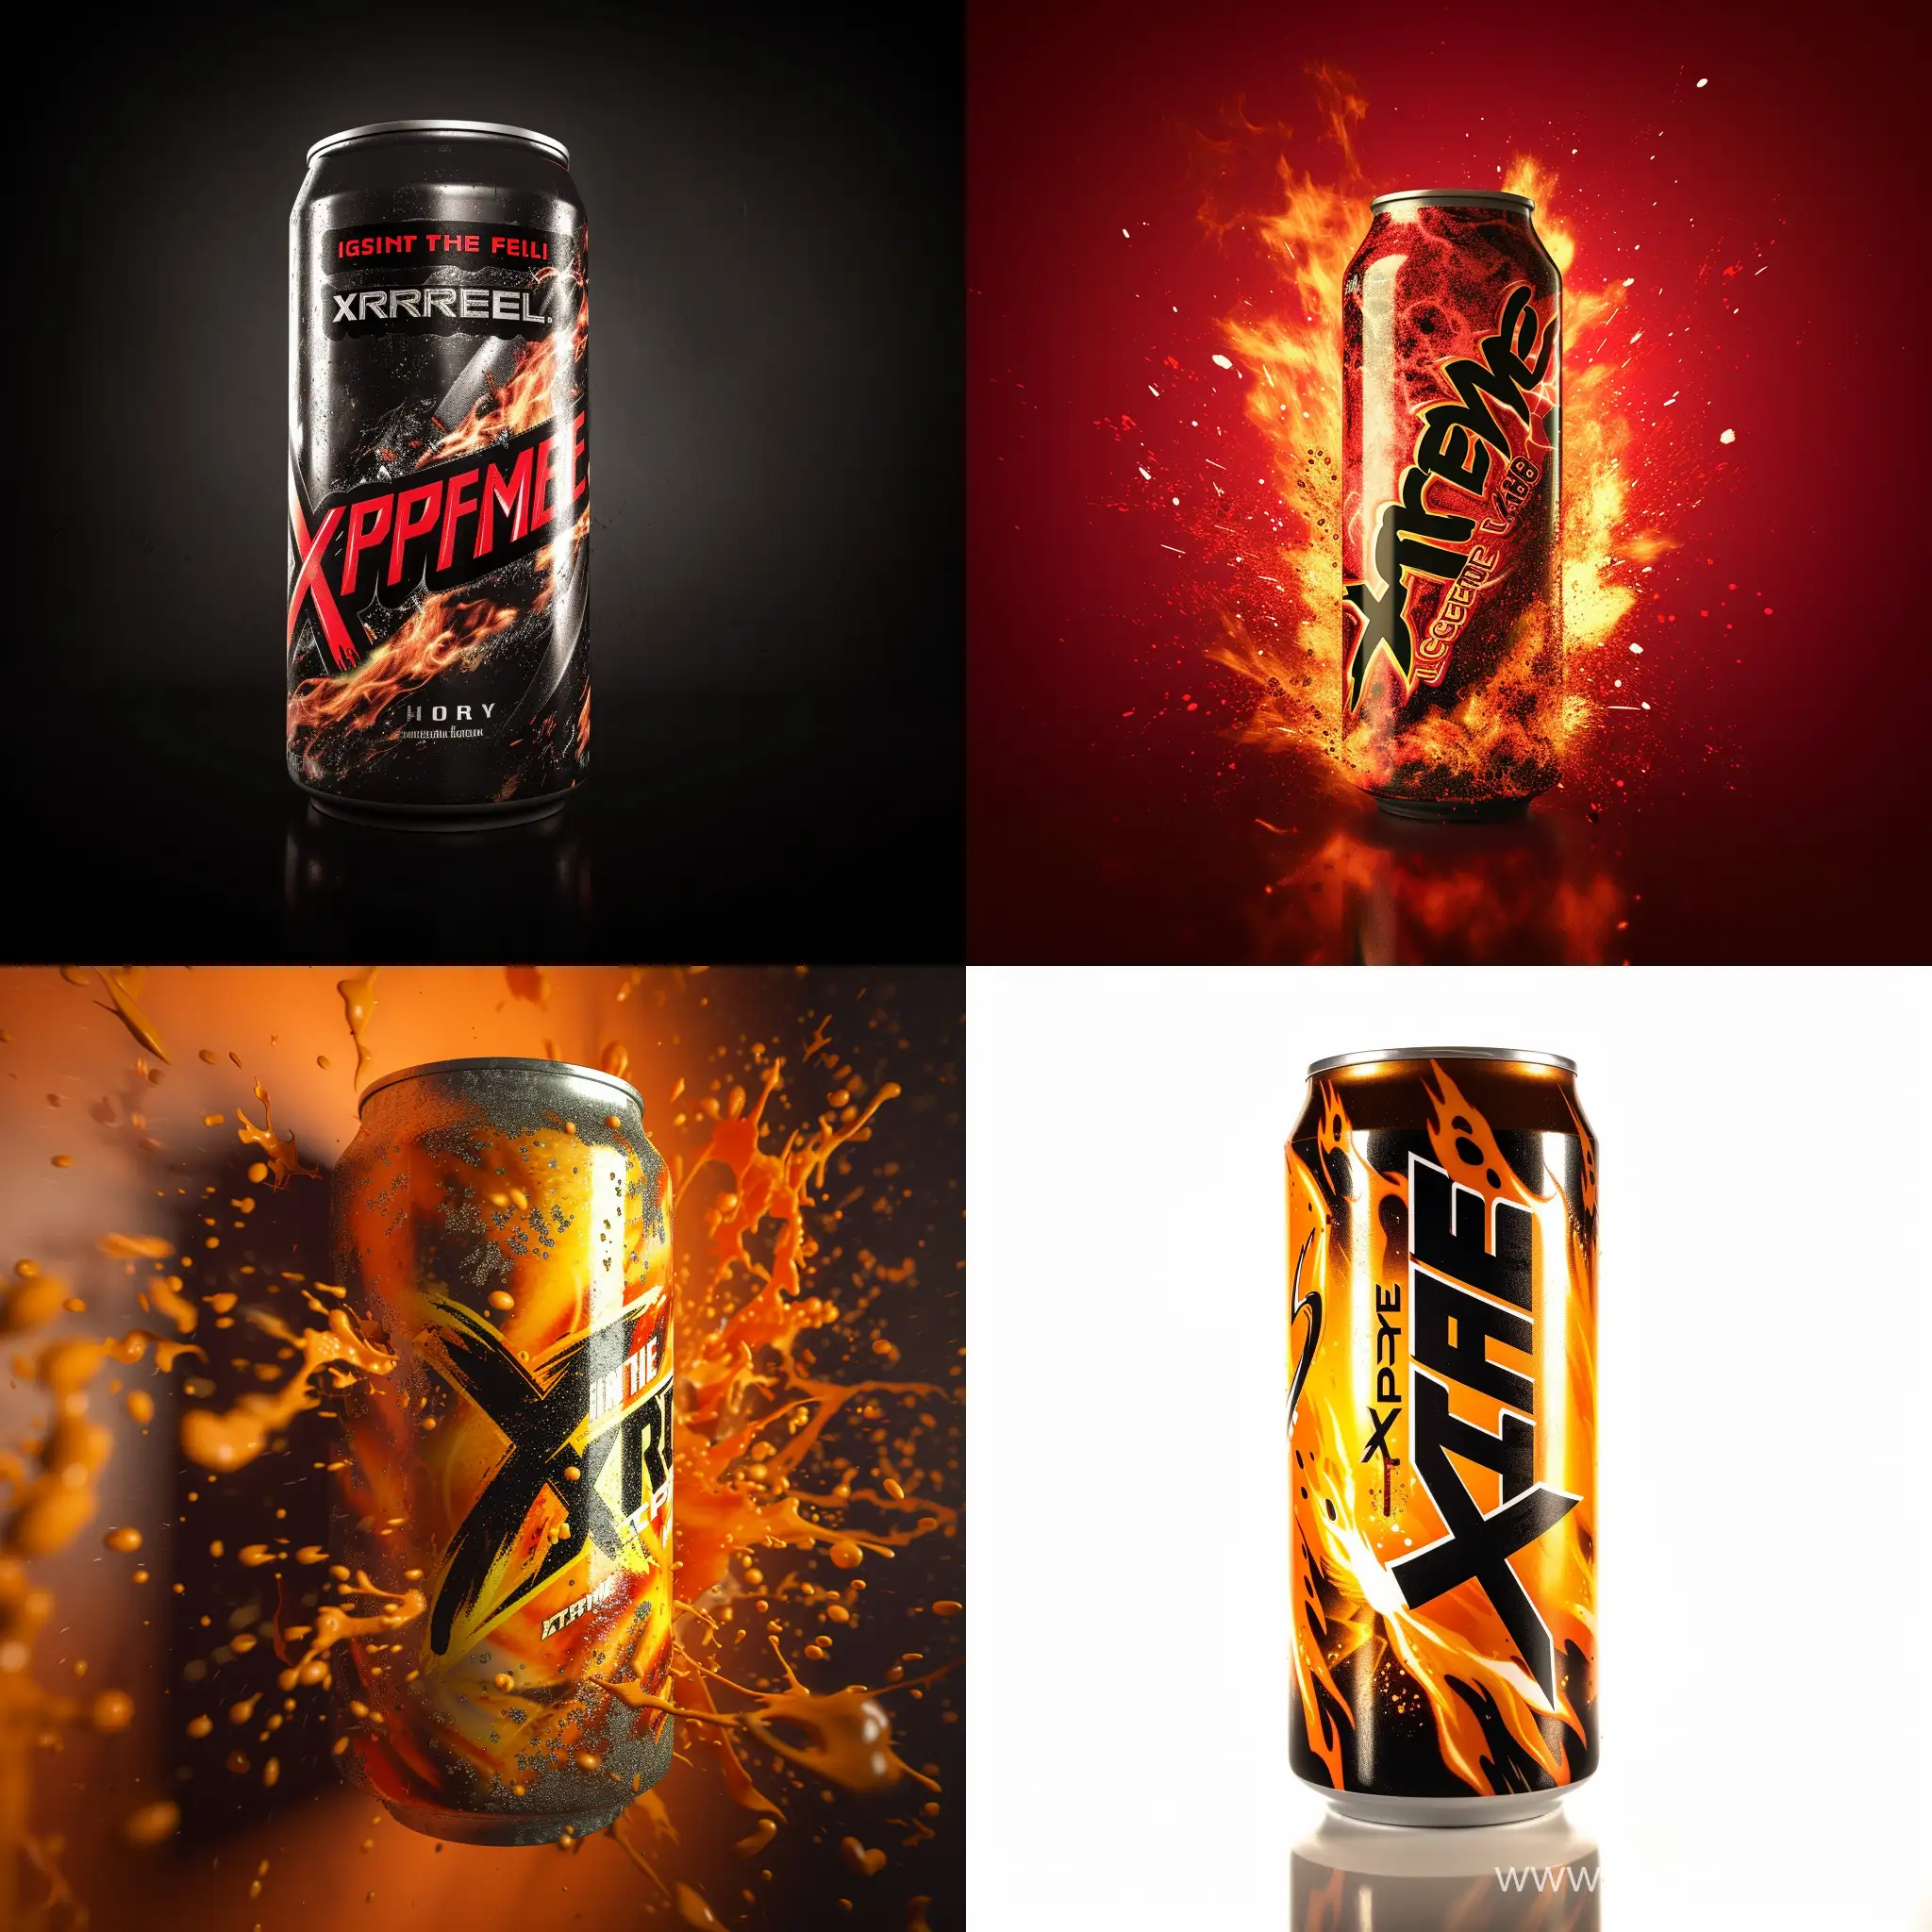 Energize-Your-Adventure-with-XtremeFuel-Ignite-the-Xtreme-Energy-Drink